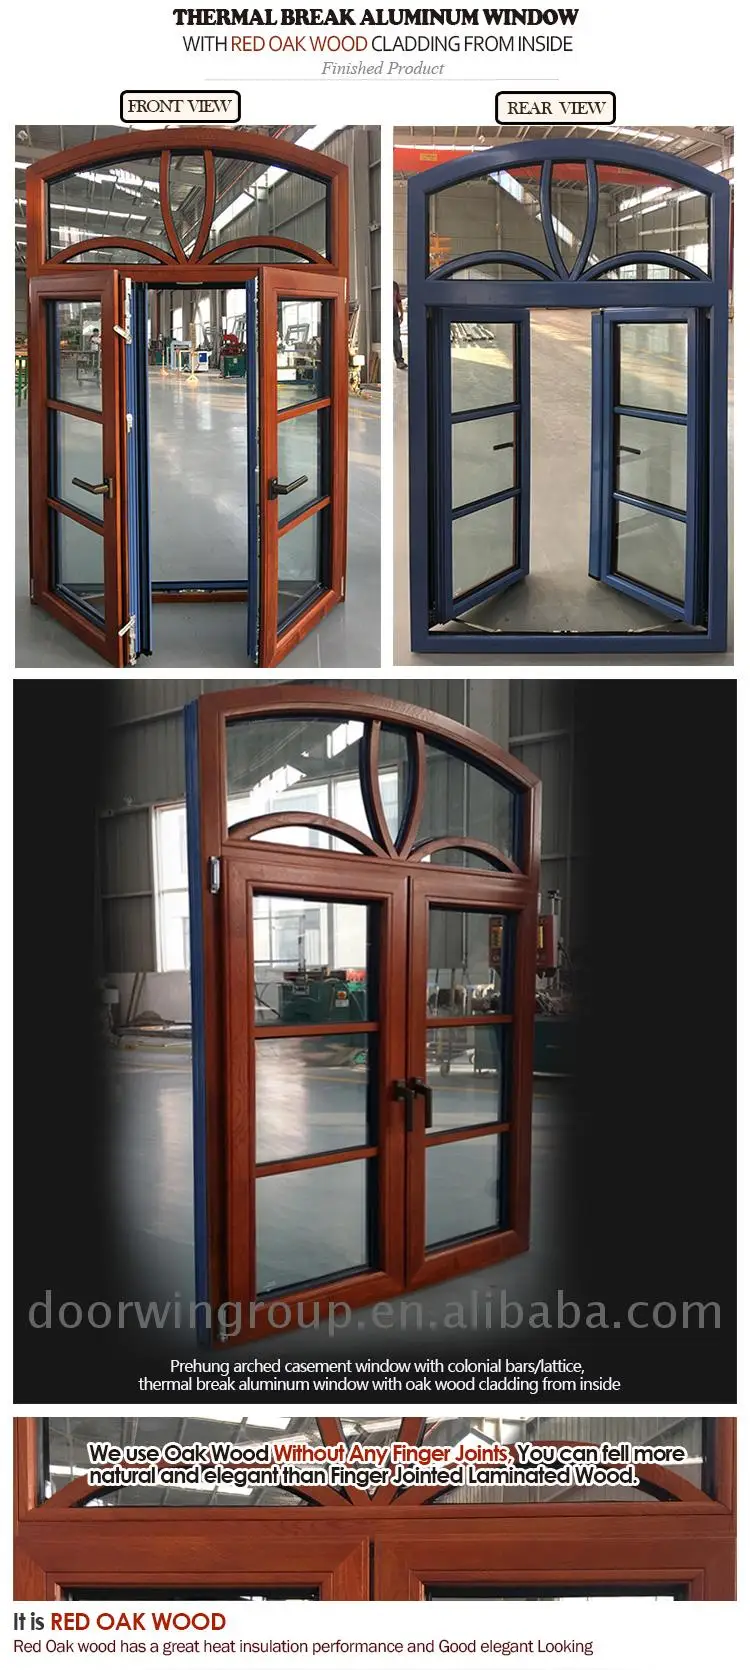 low floor to ceiling window double glass timber windows with special glass design